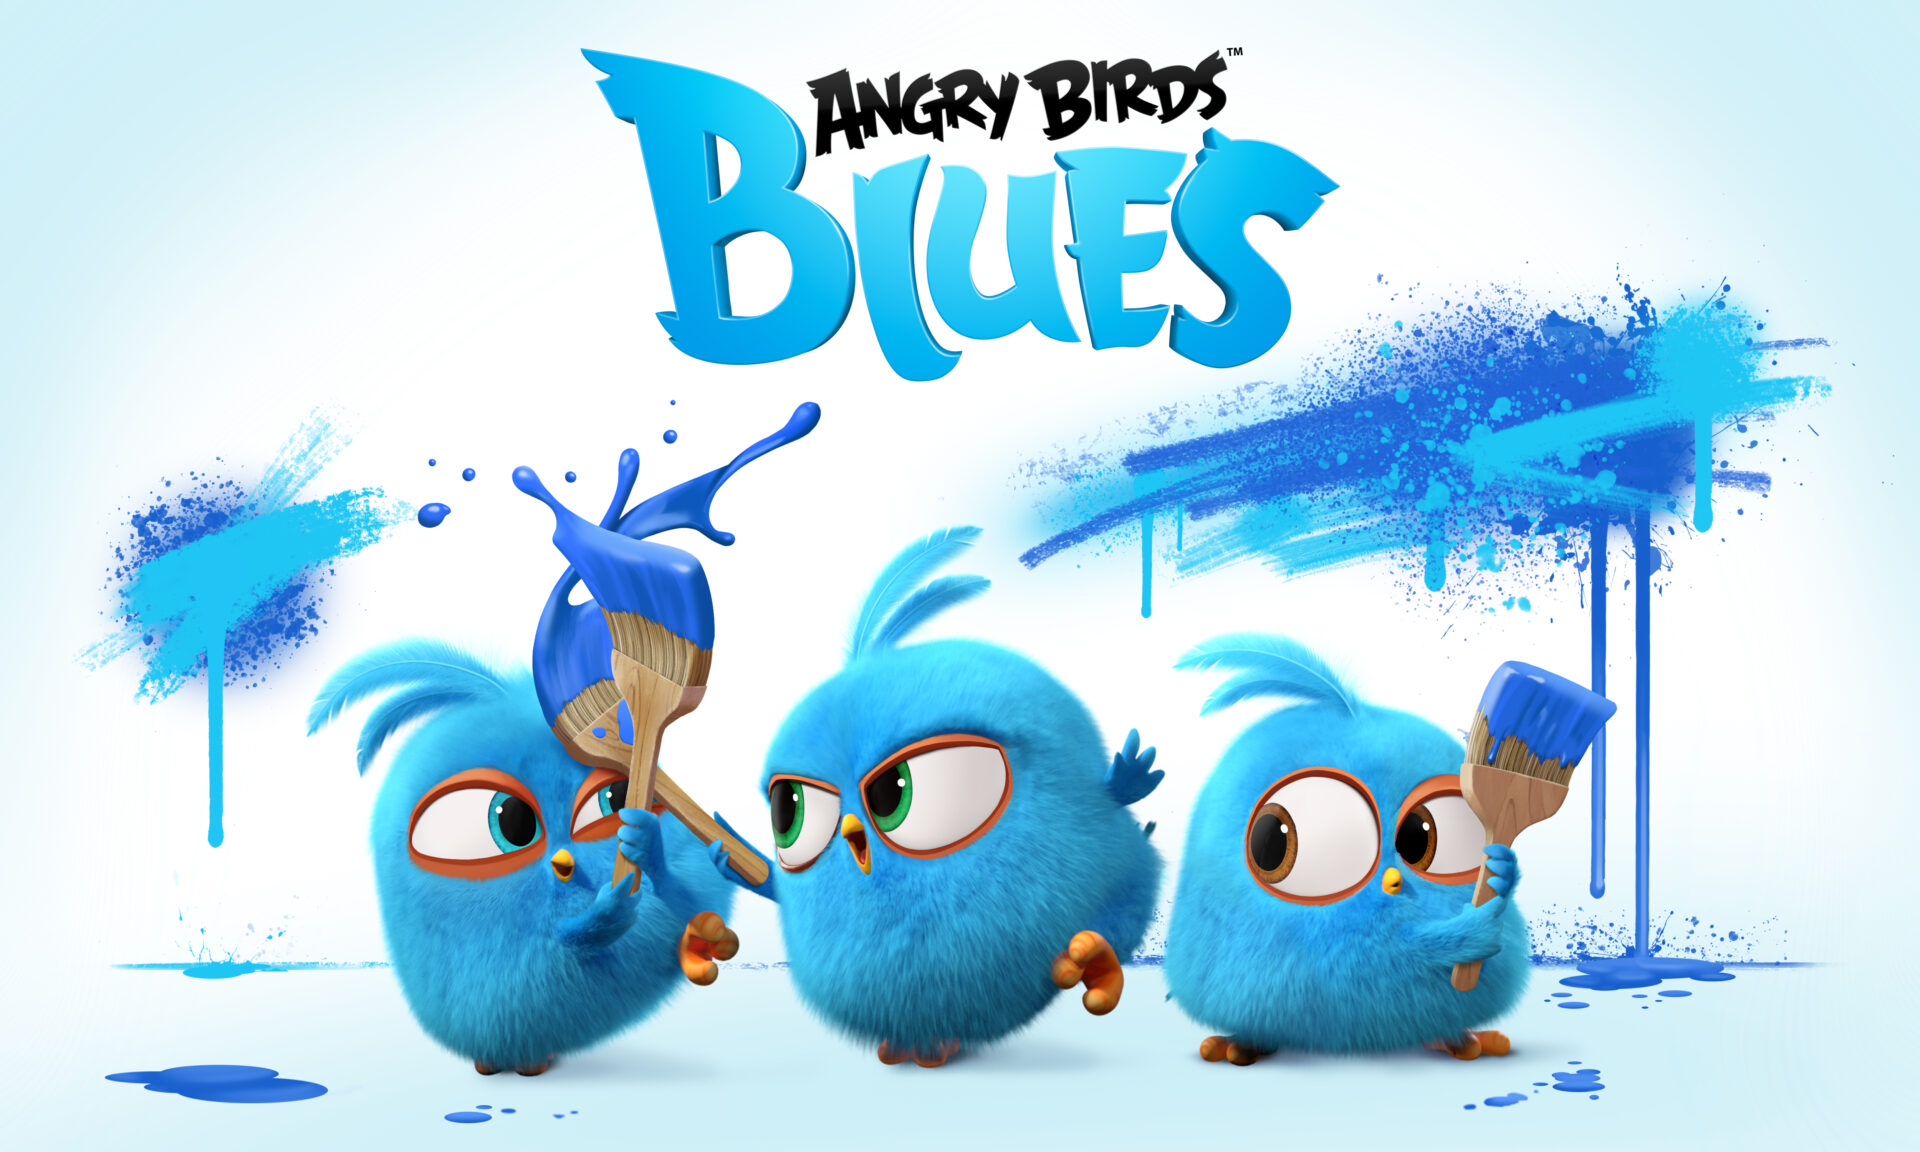 Meet Blues Jake, Jay and Jim, rambunctious bluebird triplets with big ideas that wildly succeed or hilariously fail. But no matter what happens, this fun feathered trio ALWAYS bounces back... except when the Hatchlings show up.  Cute, clueless and gullible, the lovable flock of baby birds unwittingly makes things worse for the Blues in the most adorable way. Unfazed, the brothers simply shake their smoldering tail feathers and try, try again.  Whether it’s building a clubhouse ordered from the Mighty Eagle Express, or getting a kite to fly, the Blues’ crazy antics become unbelievable comic disasters you can’t resist. Every day on Bird Island is an adventure for these unstoppable brothers.
